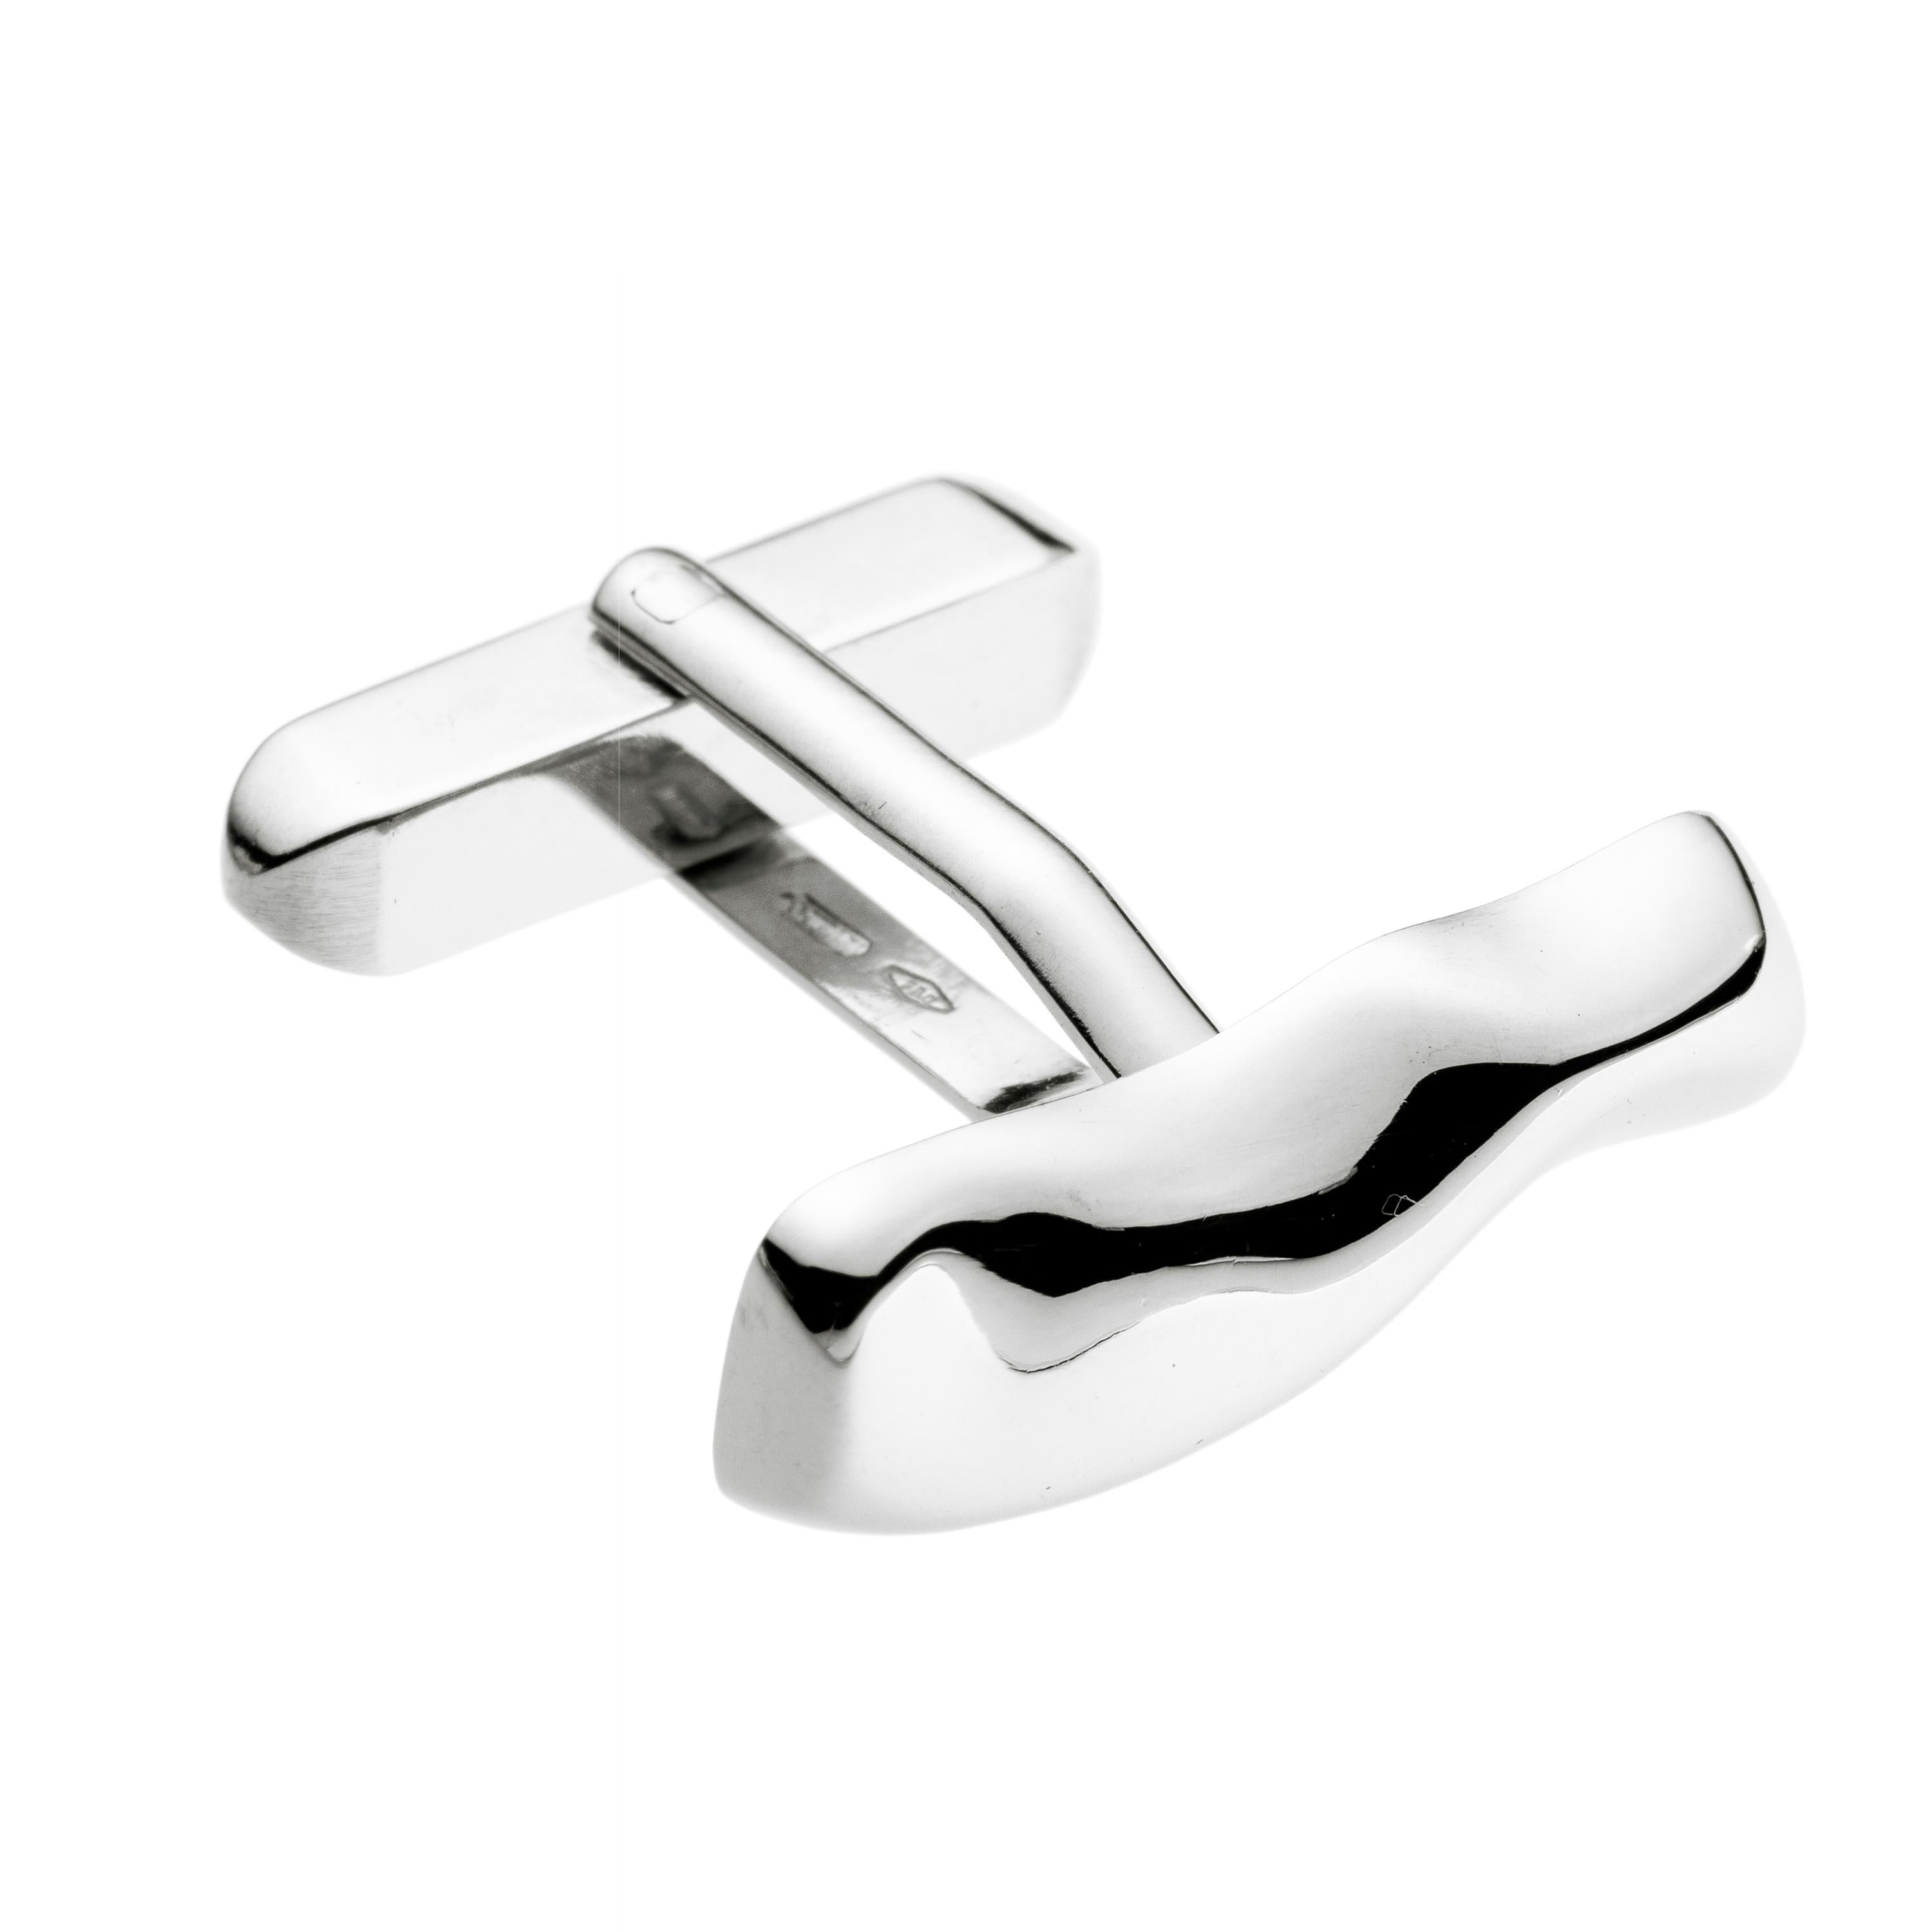 Mercure contemporary Cufflinks in white gold are made by hand in Nathalie Jean's Milan atelier in limited edition. Small, delicate, ebbing sculptures with seemingly random forms, these supple shapes are modulated in relief and seem to flow like